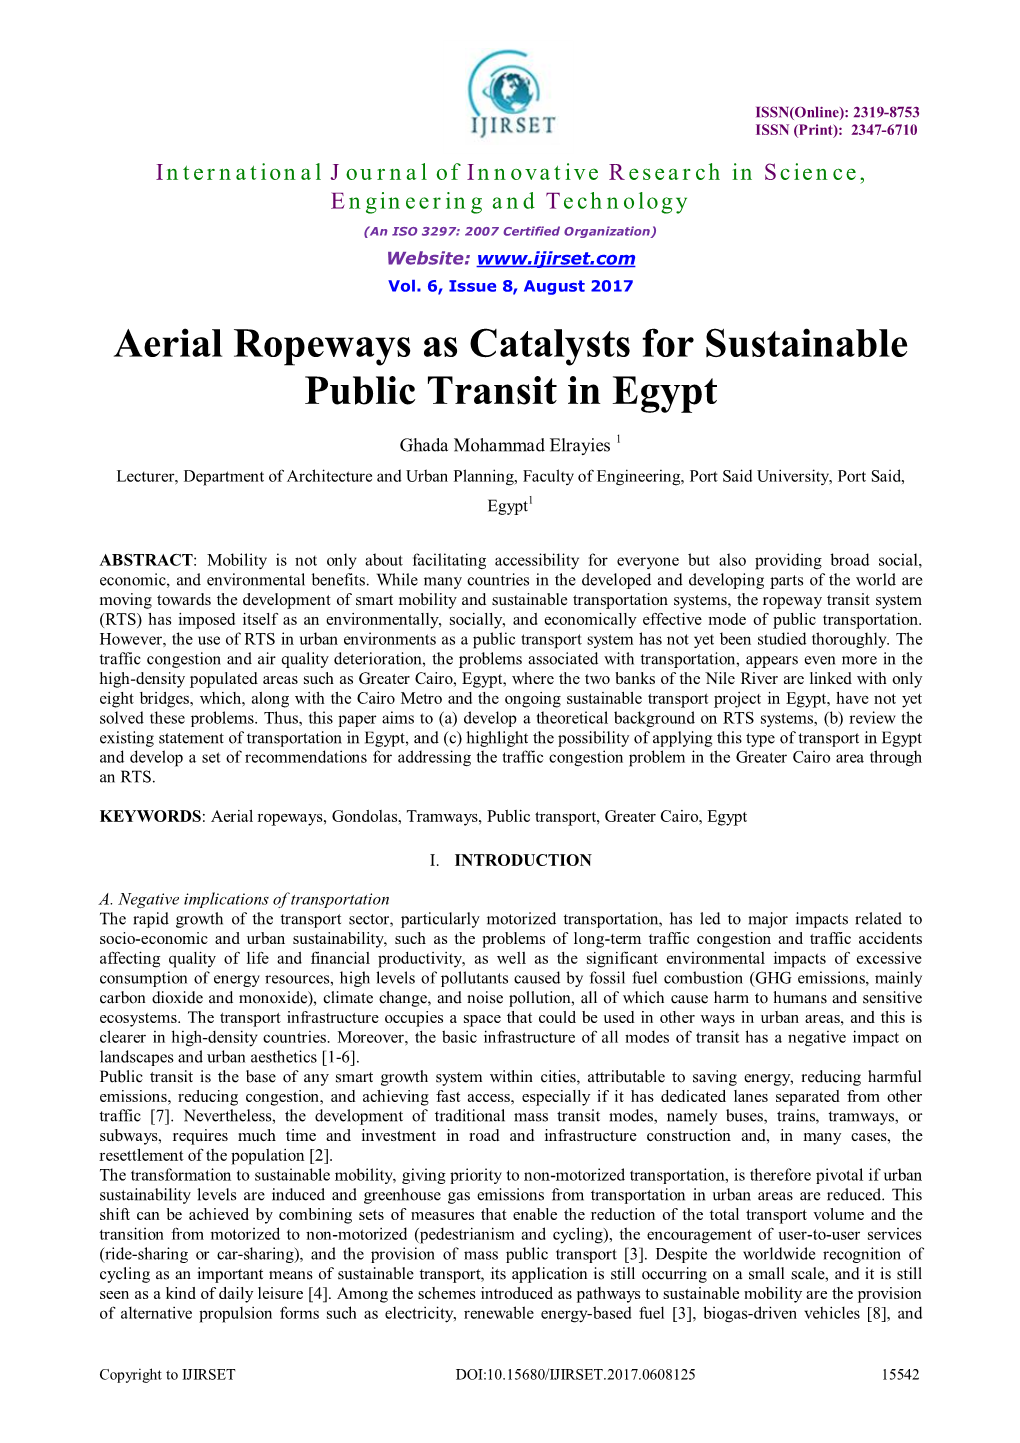 Aerial Ropeways As Catalysts for Sustainable Public Transit in Egypt